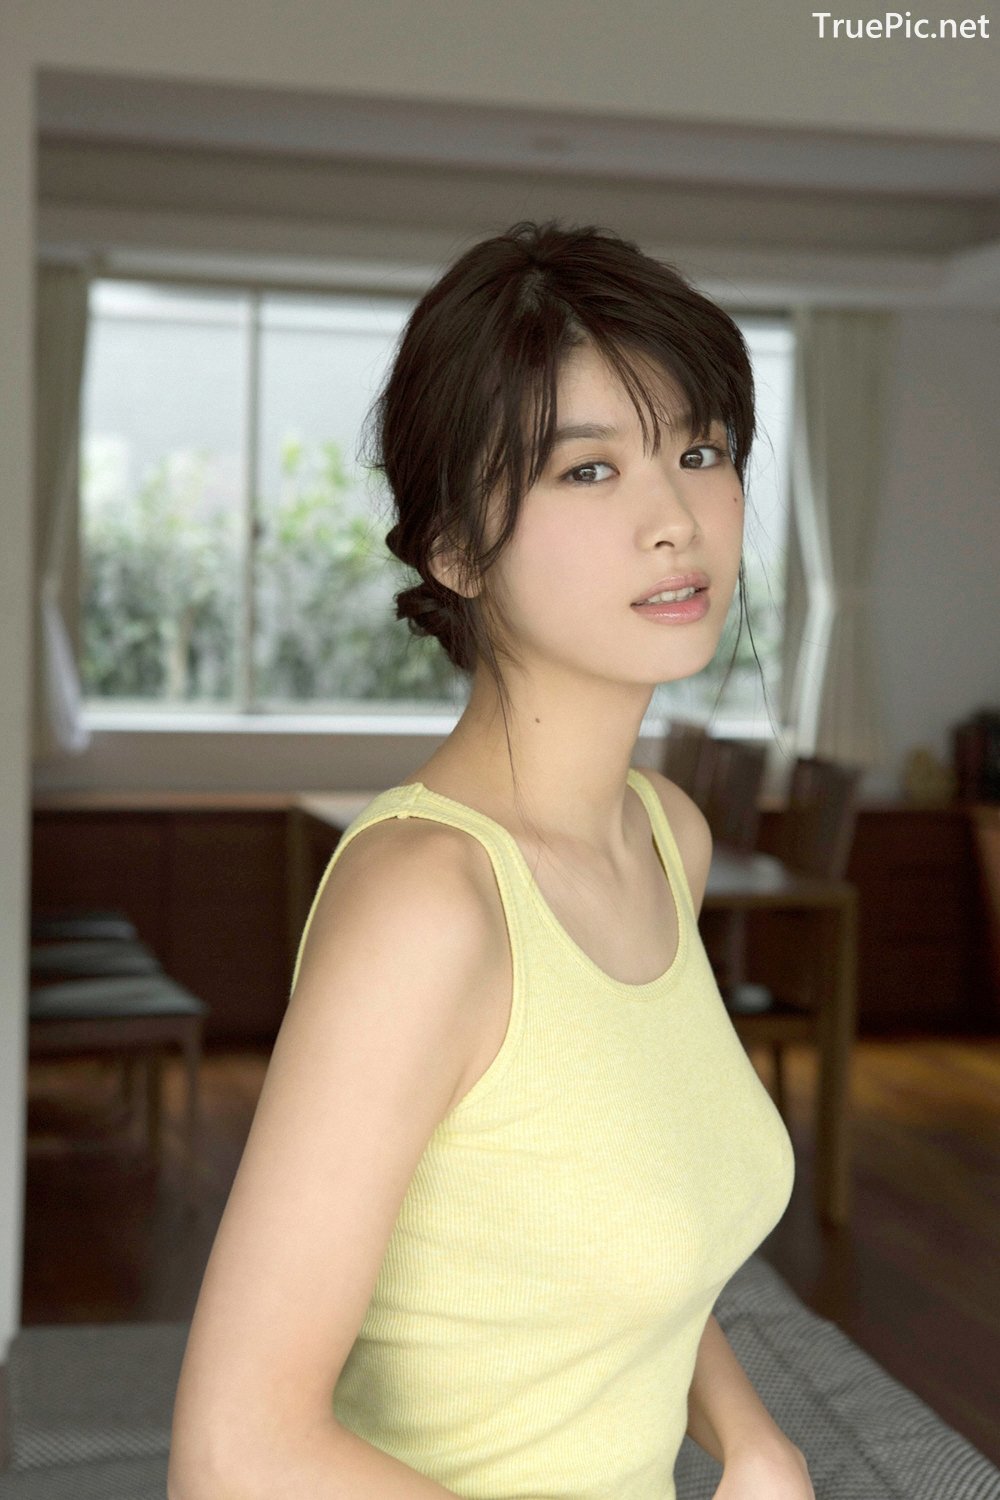 Japanese Actress And Model - Fumika Baba - YS Web Vol.729 - TruePic.net - Picture-10